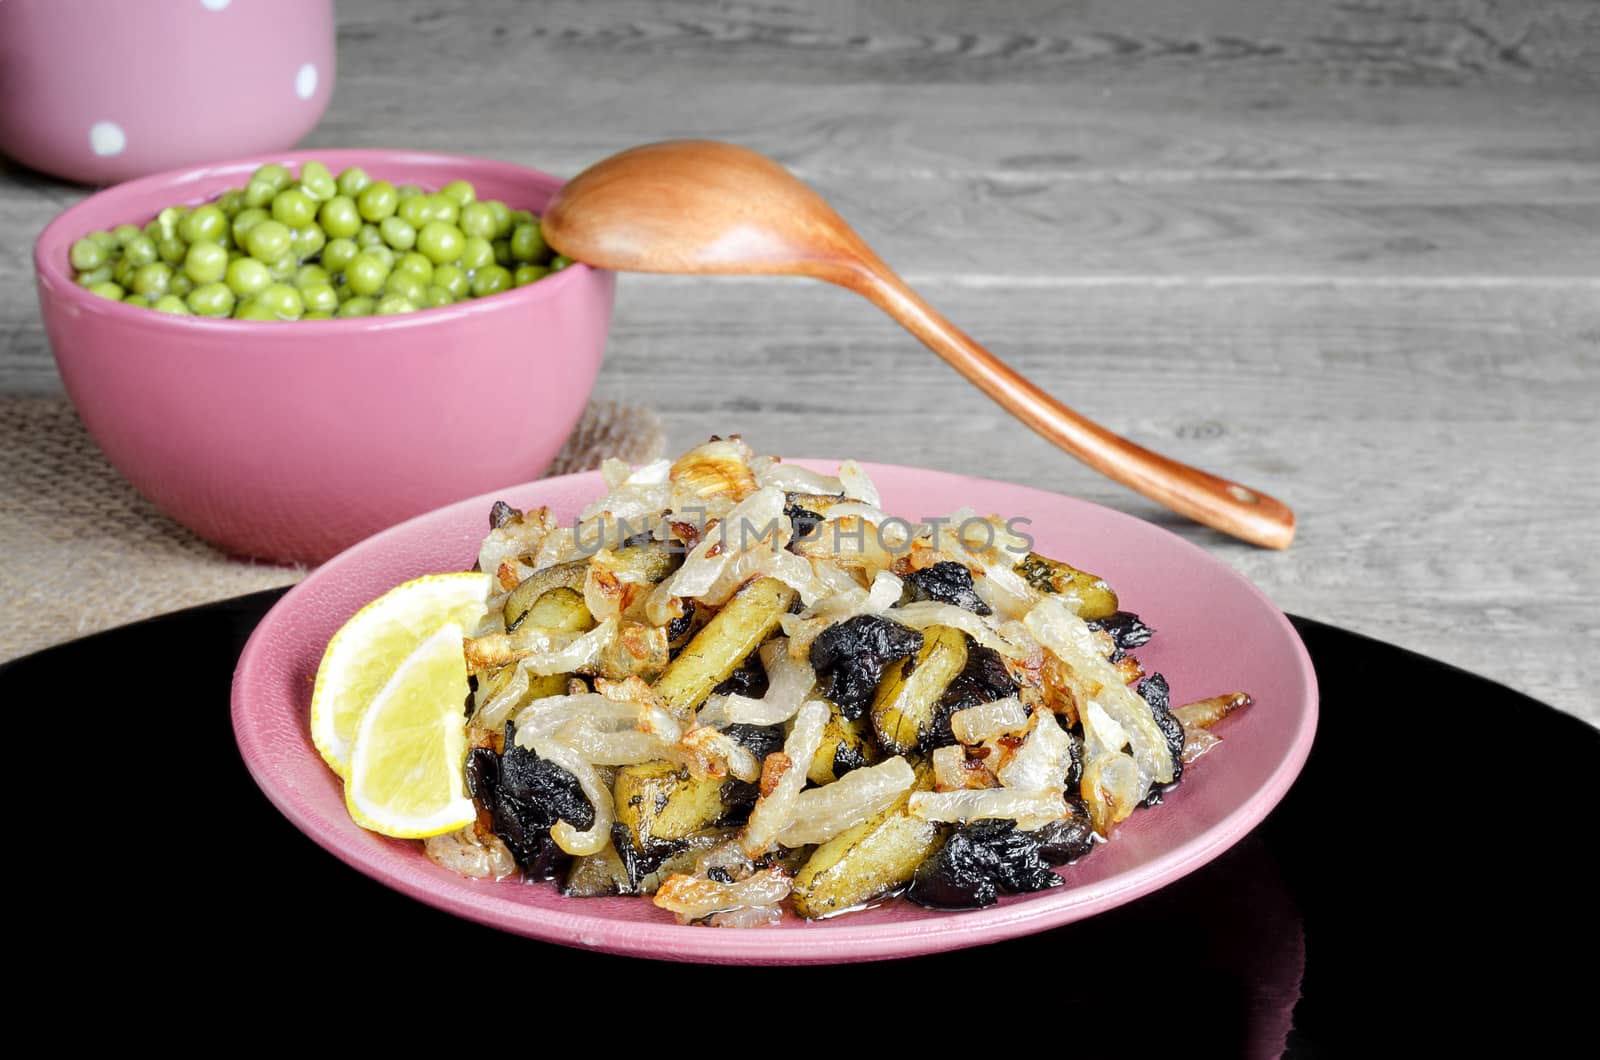 Fried potatoes with mushrooms and onions and green peas. On the black surfaces and grey wood background.